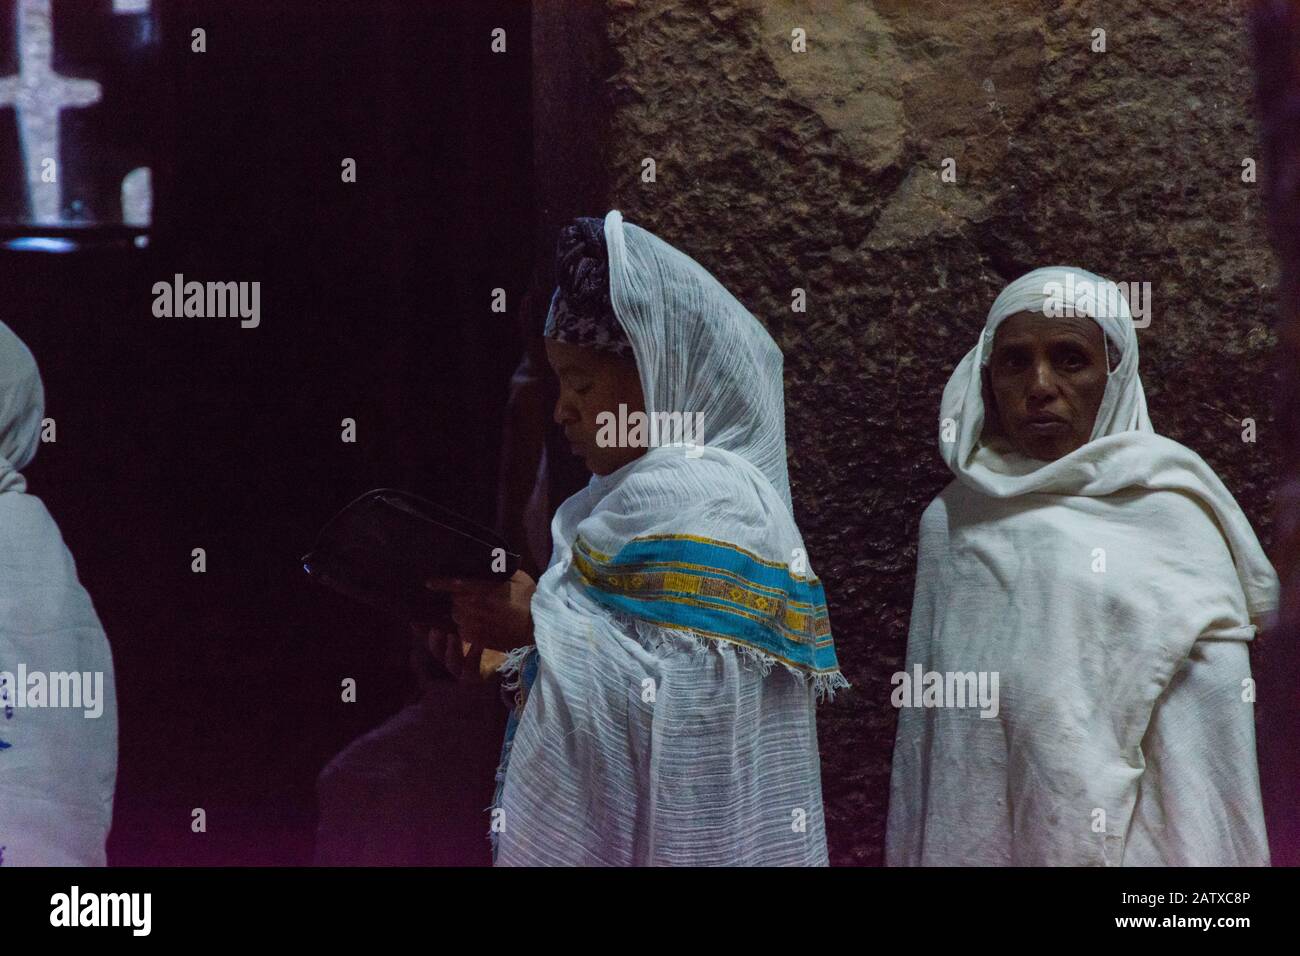 Lalibela, Ethiopia - Nov 2018: People dressed up in white traditional ethiopian clothes praying in interior of the the rock excavated church in Lalibe Stock Photo